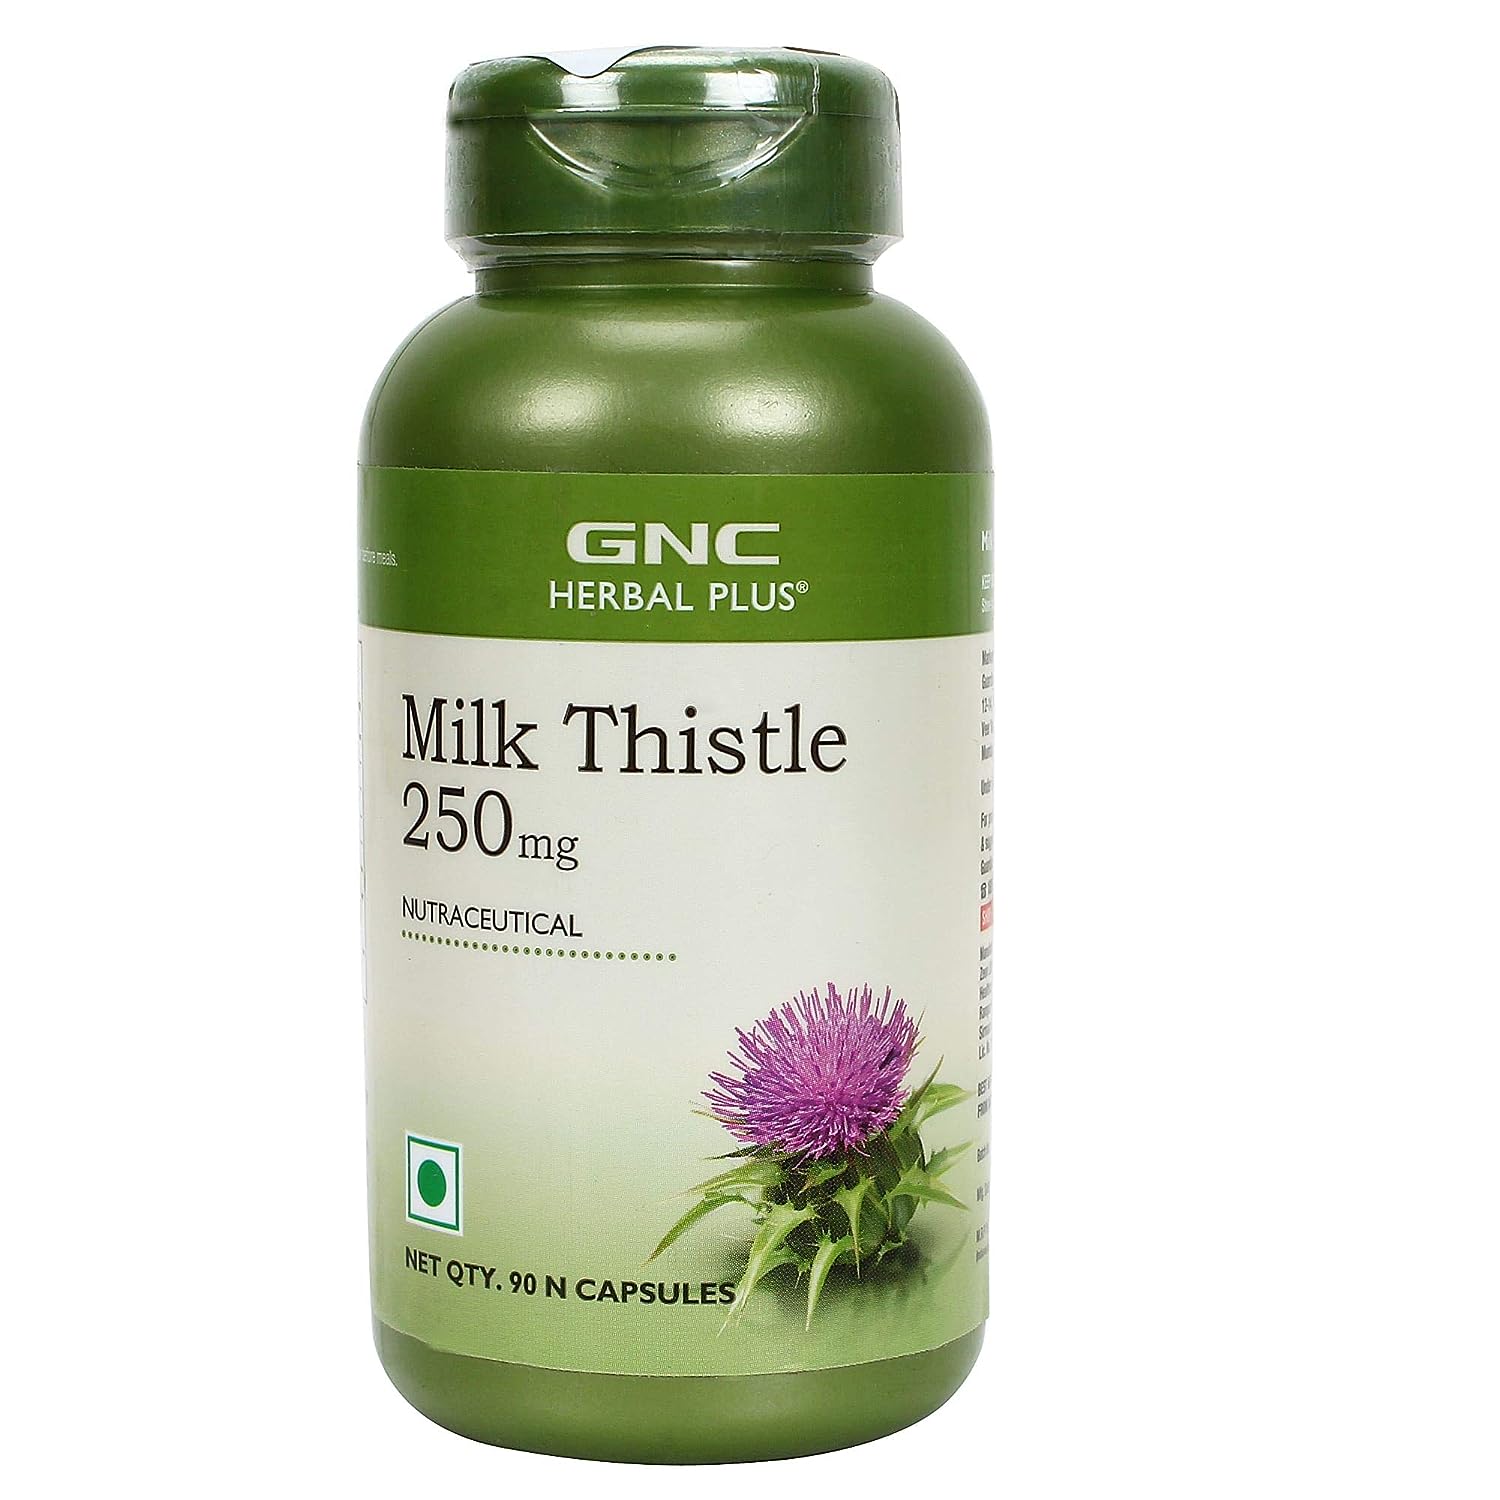 GNC Herbal Plus Milk Thistle 250 Mg Supports Healthy Liver Function